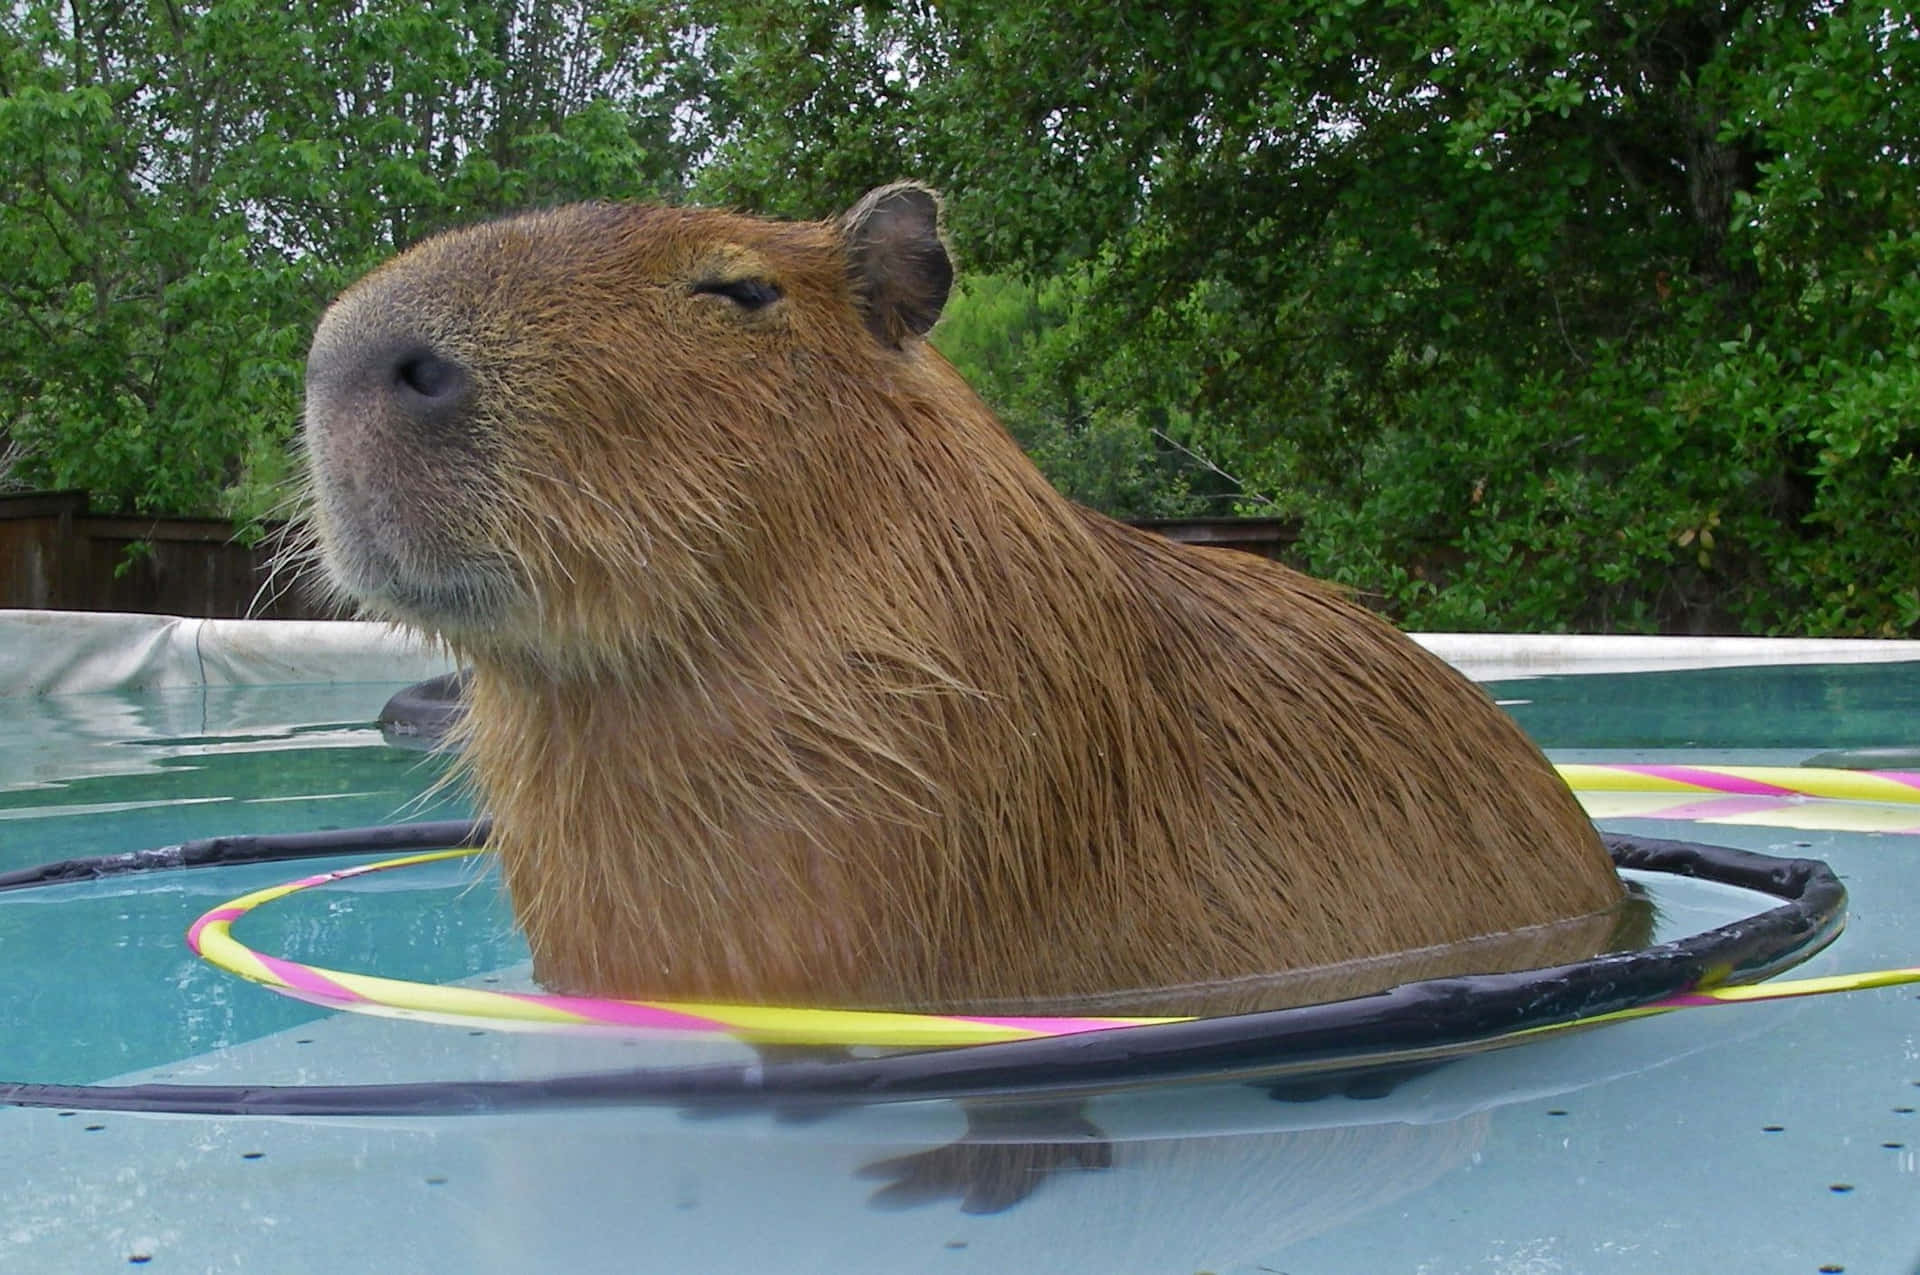 A capybara looking out over it's natural habitat.